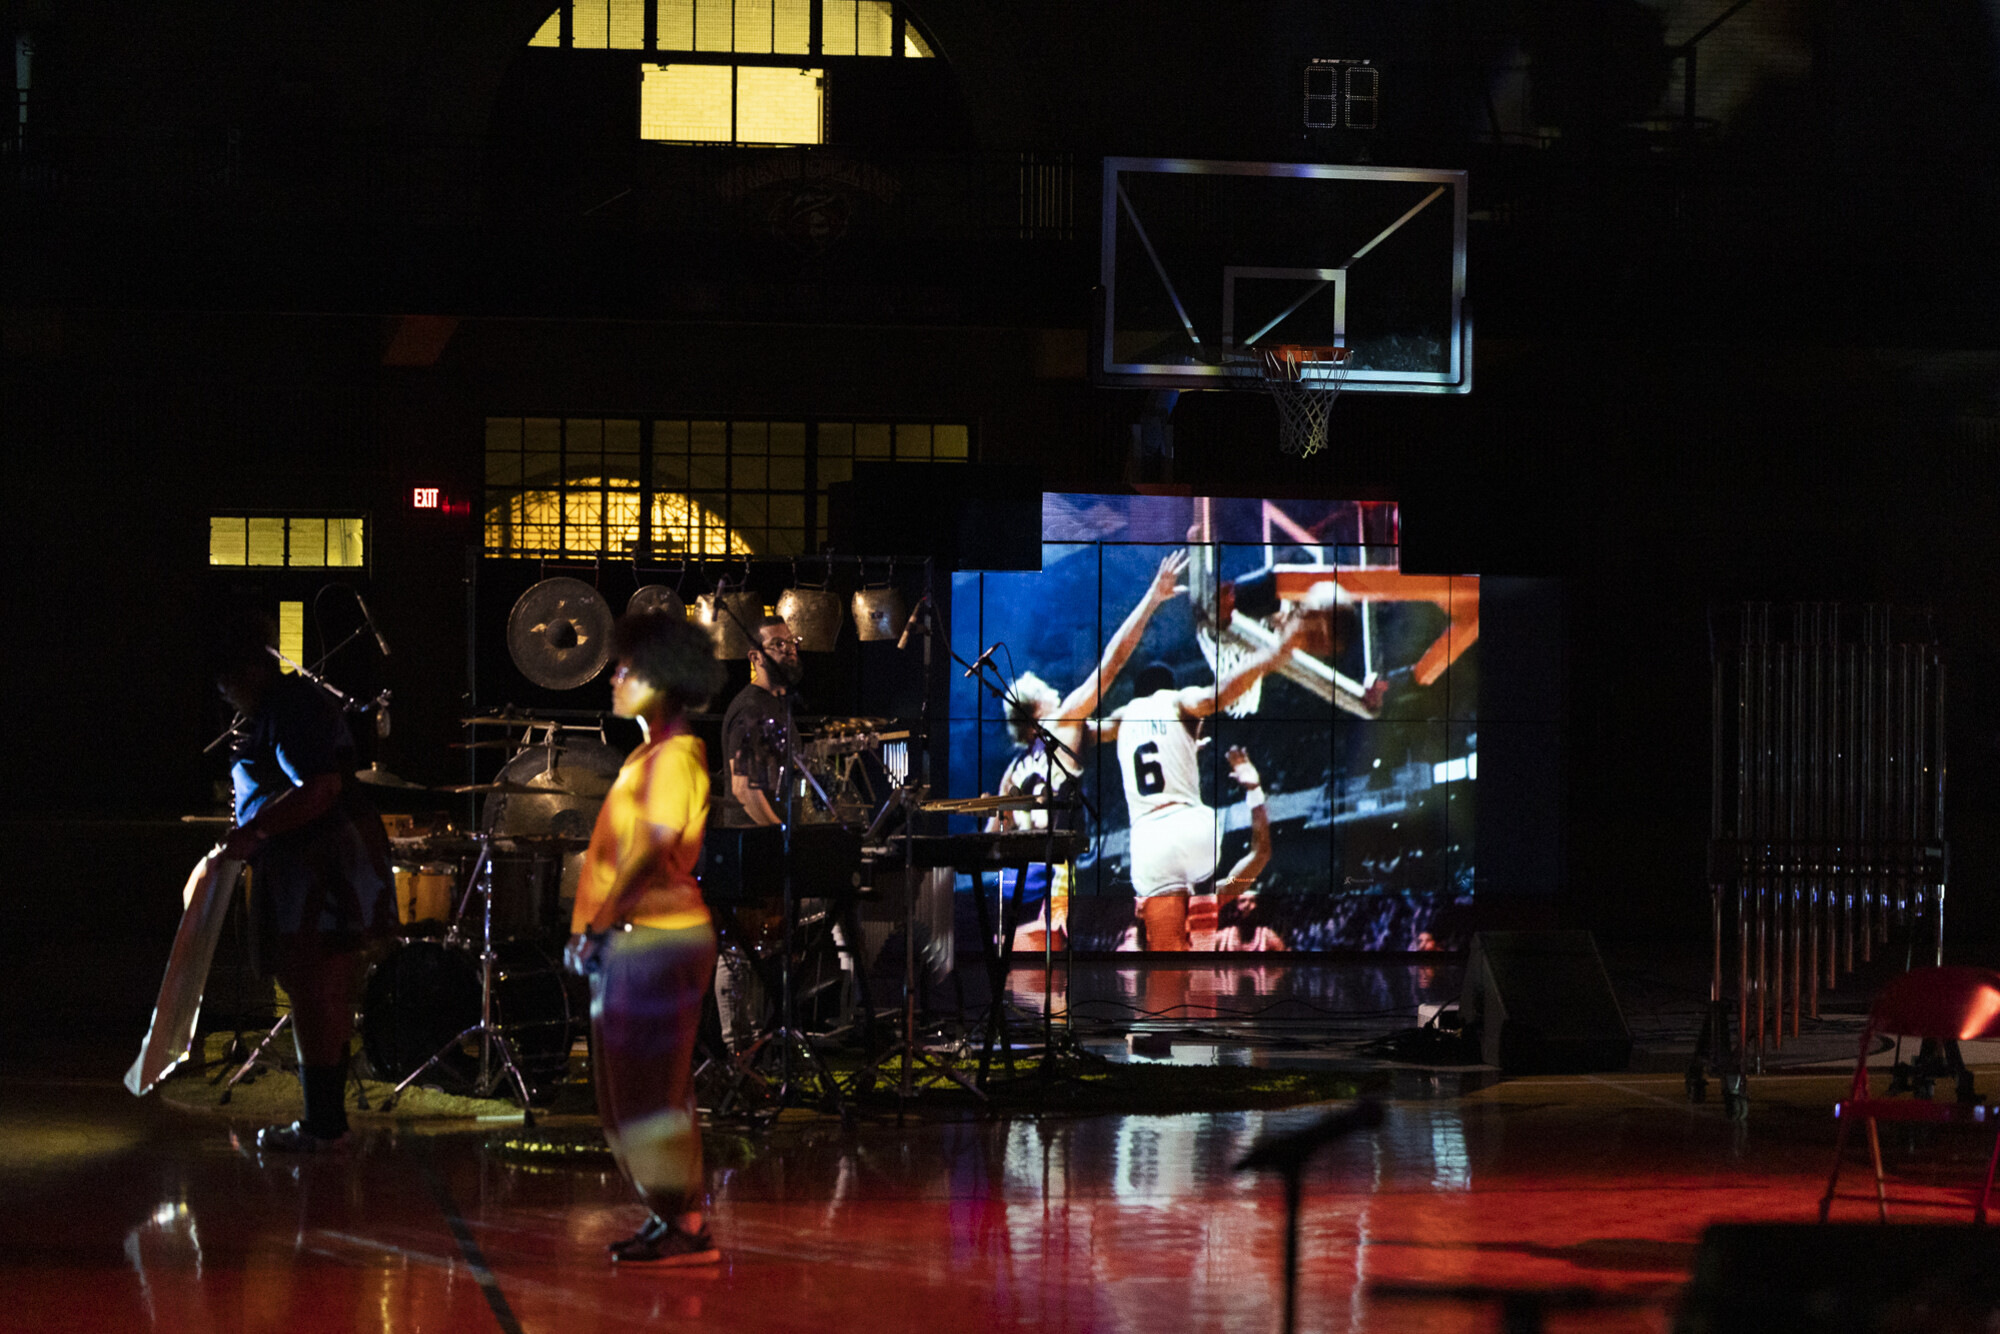 basketball images projected during performance